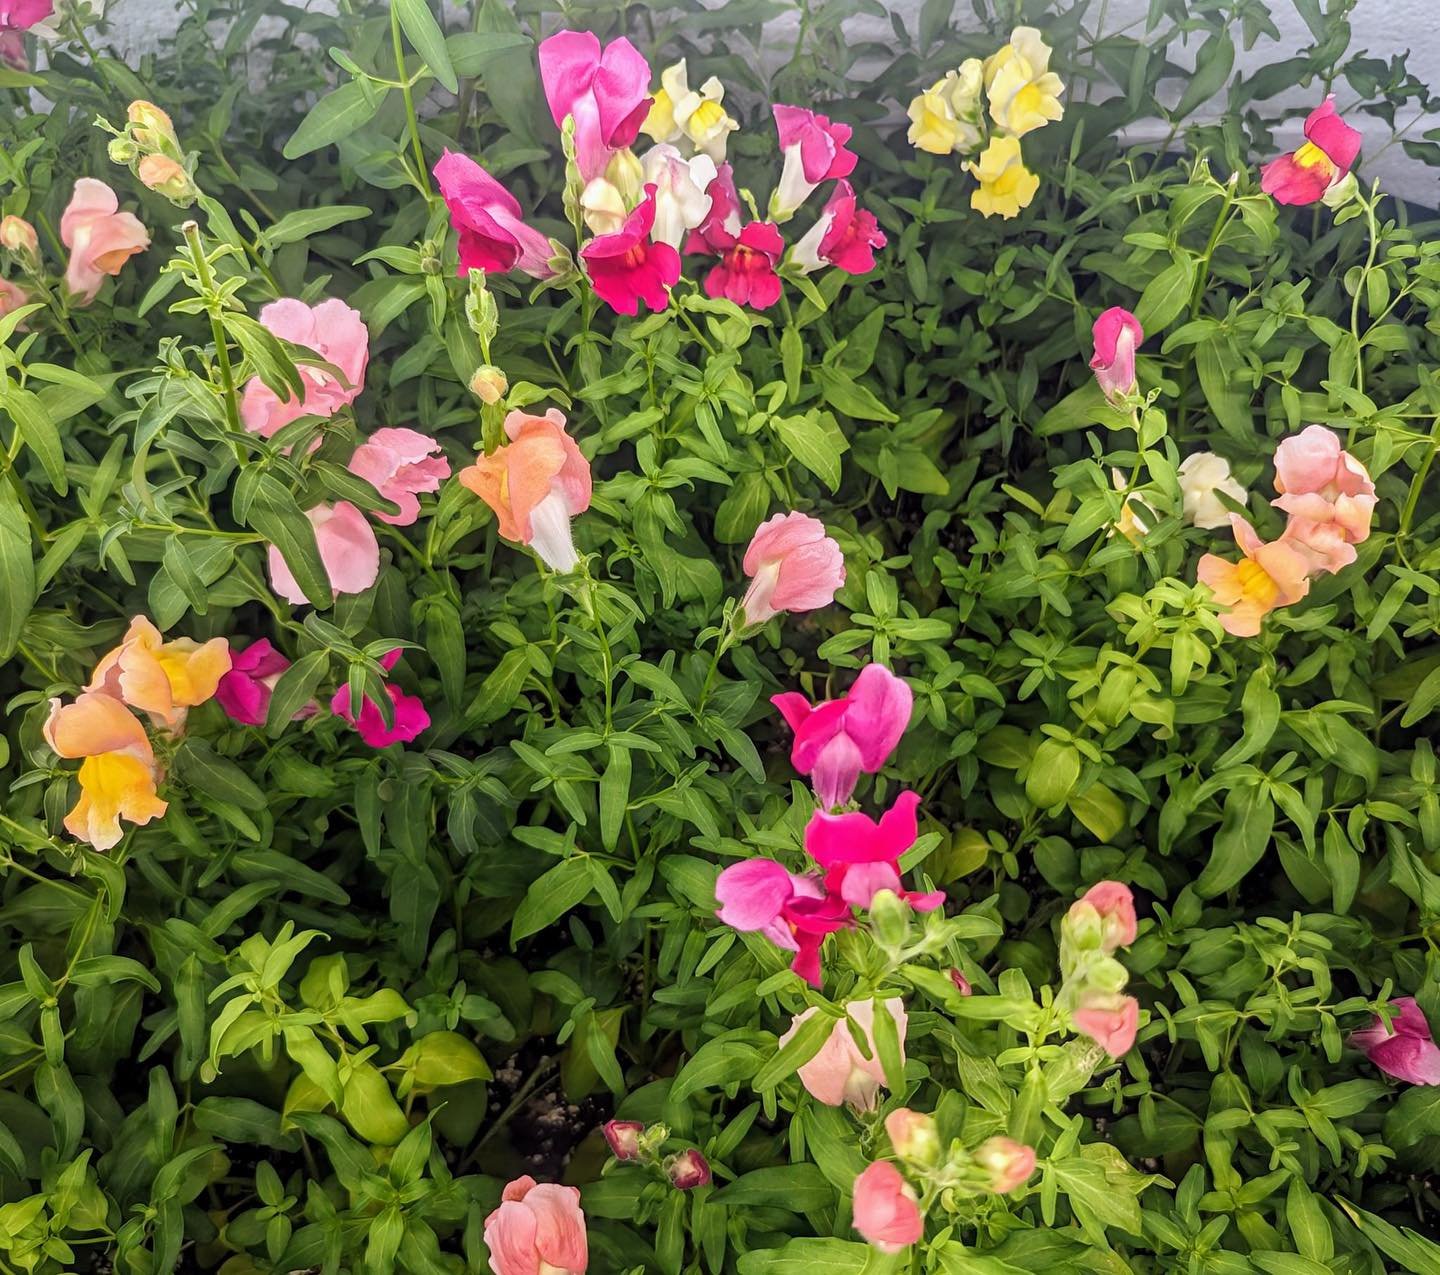 We&rsquo;re growing Dwarf Snap Dragons!! Another gorgeous, colourful addition to our space. This Edible Flower is not only a visual masterpiece but contains various antioxidants, including flavonoids and phenolic compounds. These antioxidants help pr